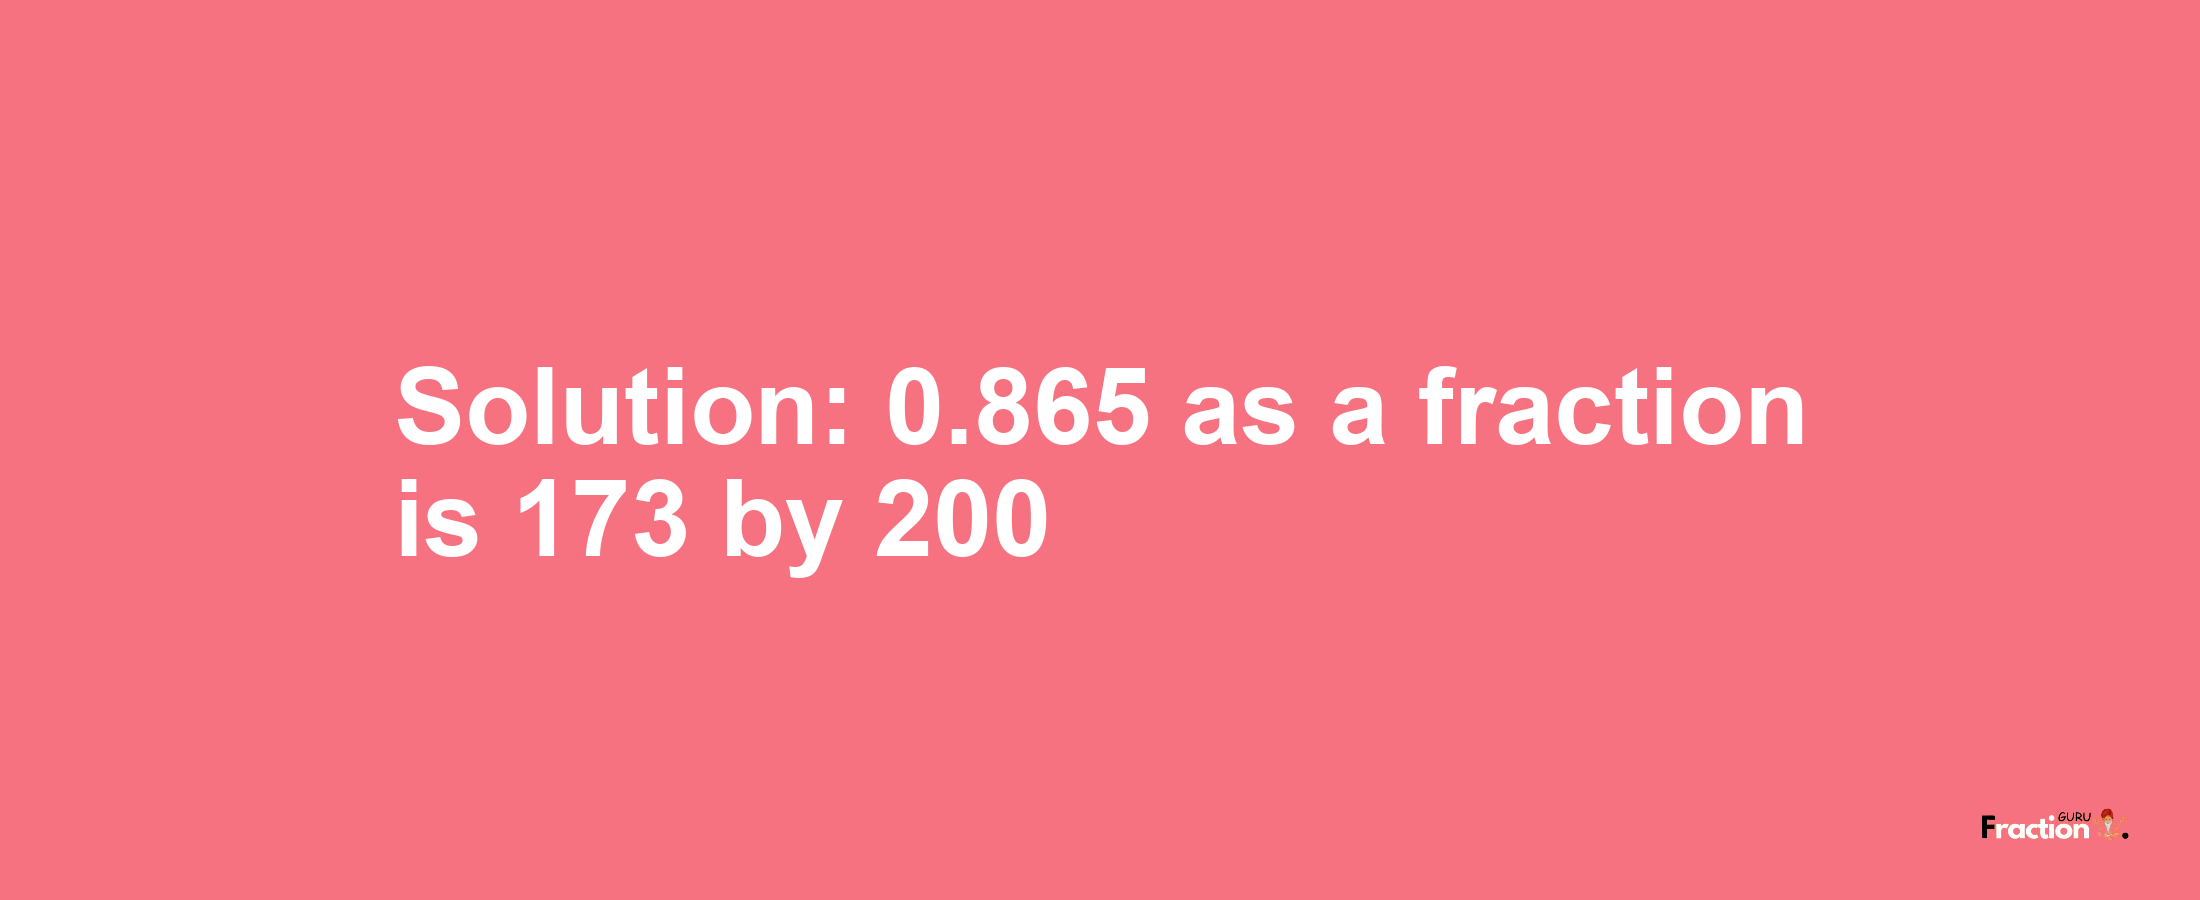 Solution:0.865 as a fraction is 173/200